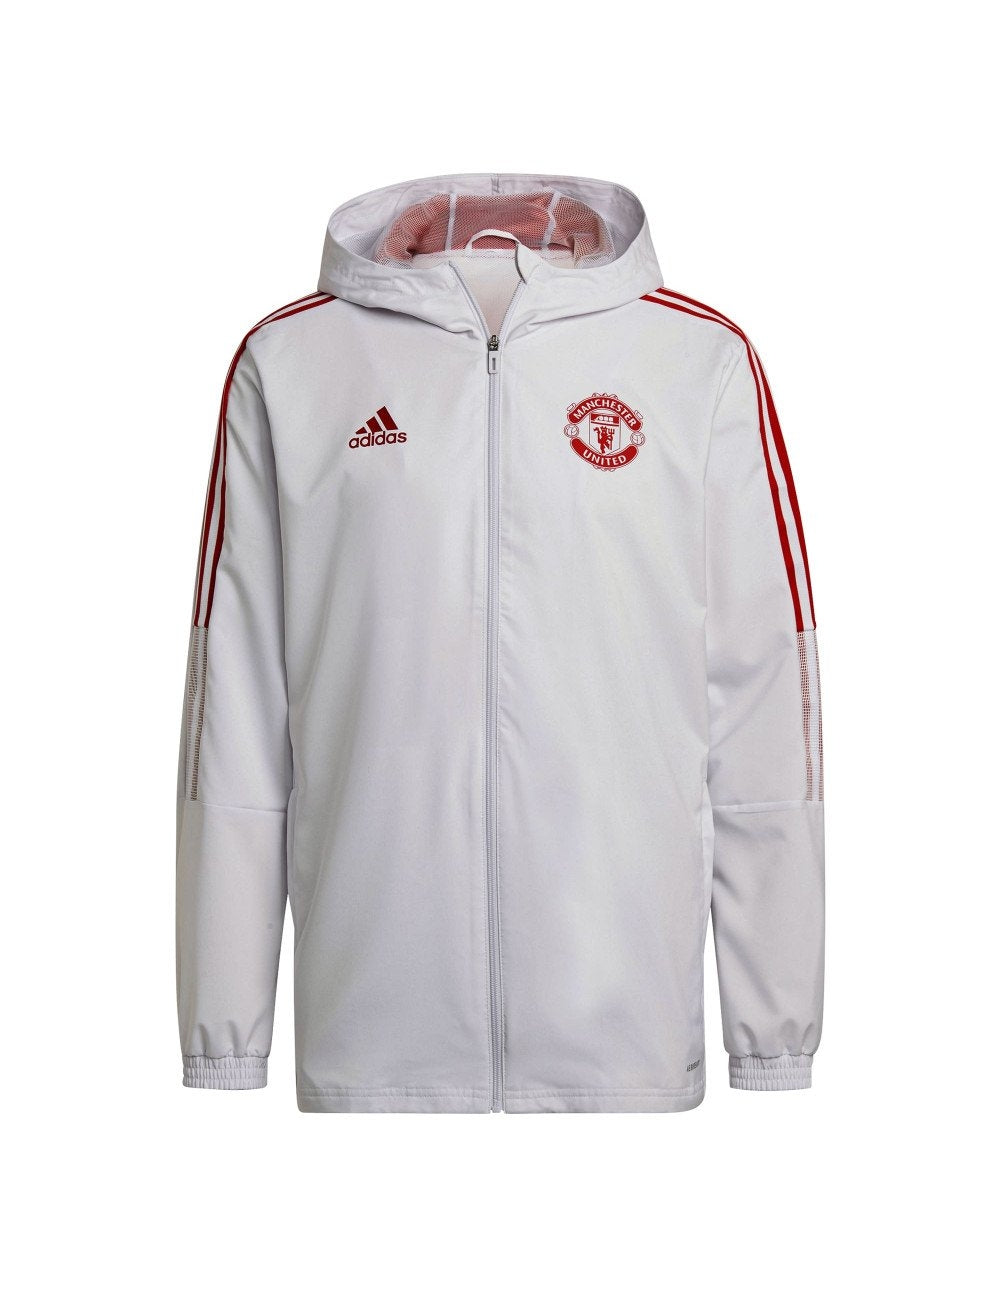 Manchester United Hooded Track Jacket 2021/2022 - Grey/Red